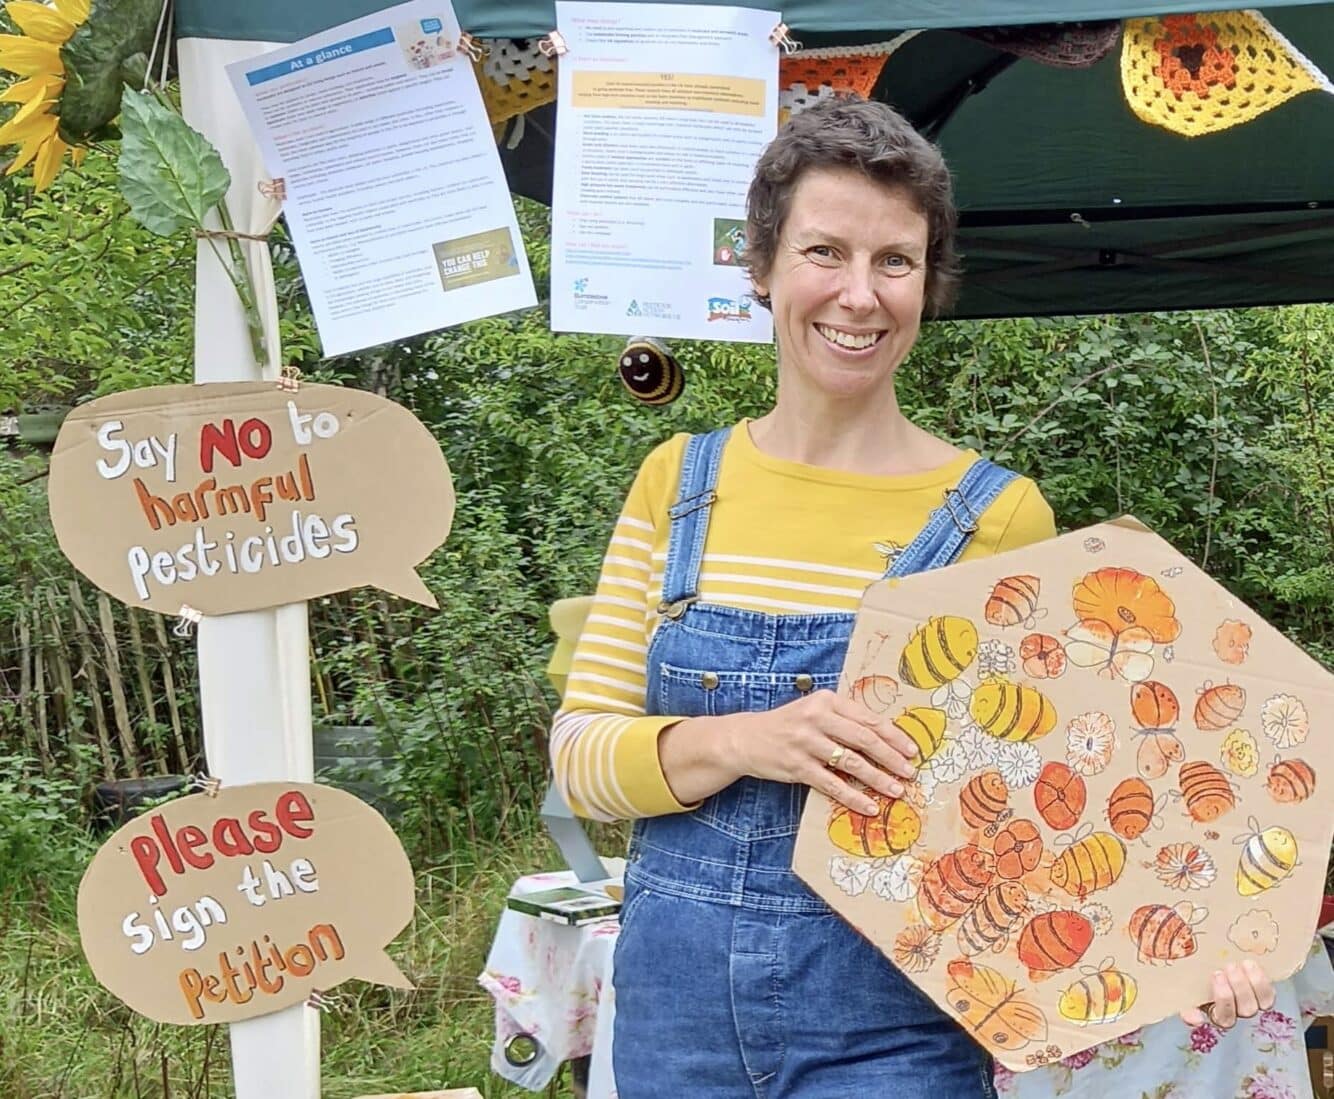 Image of Polly, new Eco Diocese Officer, at a stall holding a cardboard sign protesting against using pesticides.